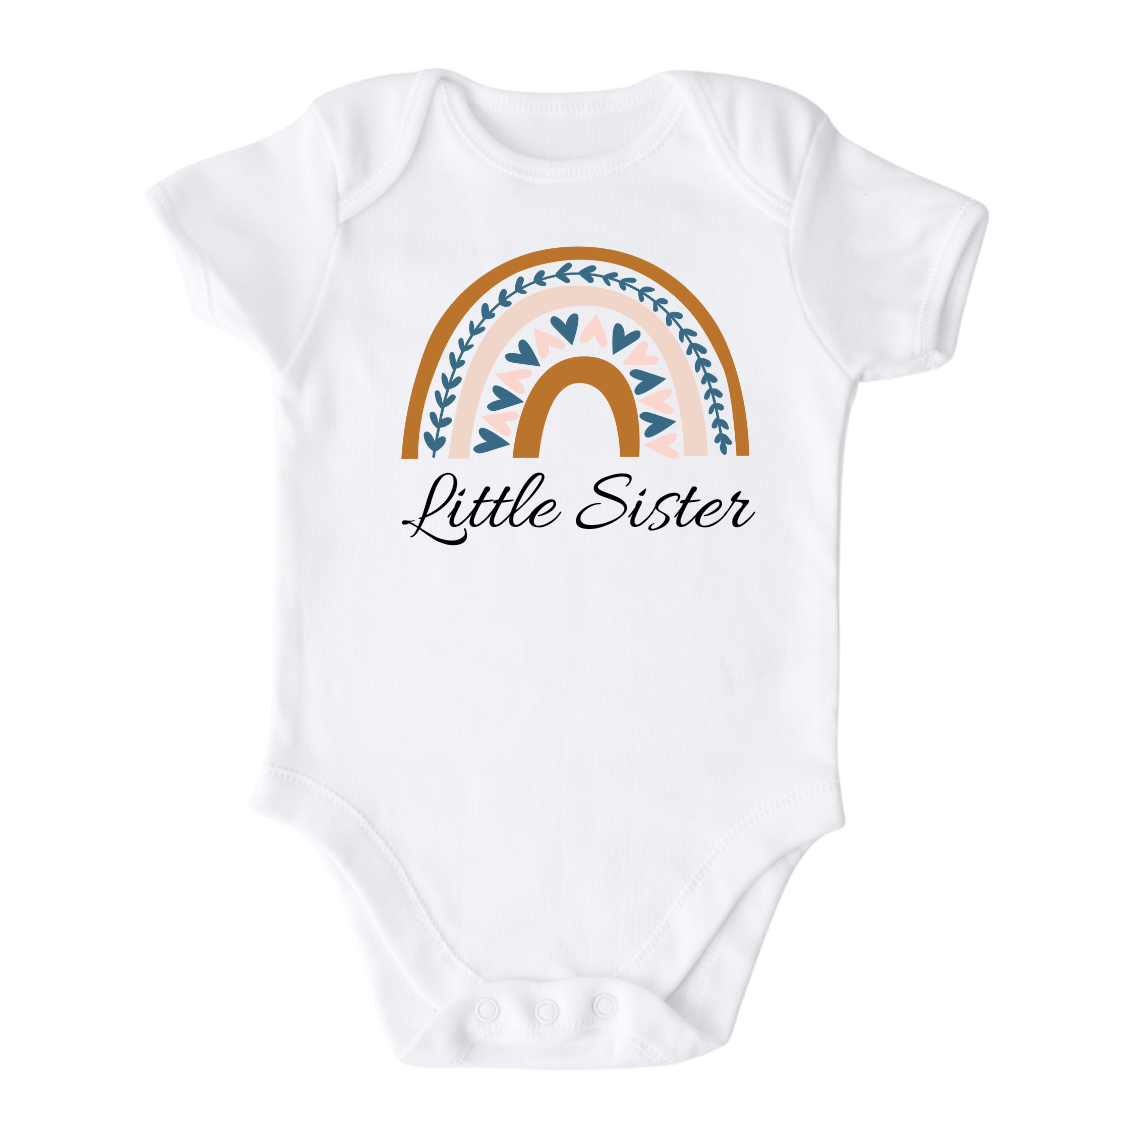 Baby Onesie with a boho printed graphic of a colorful rainbow and the text 'Little Sister.' This enchanting t-shirt celebrates the arrival of a precious little sister.